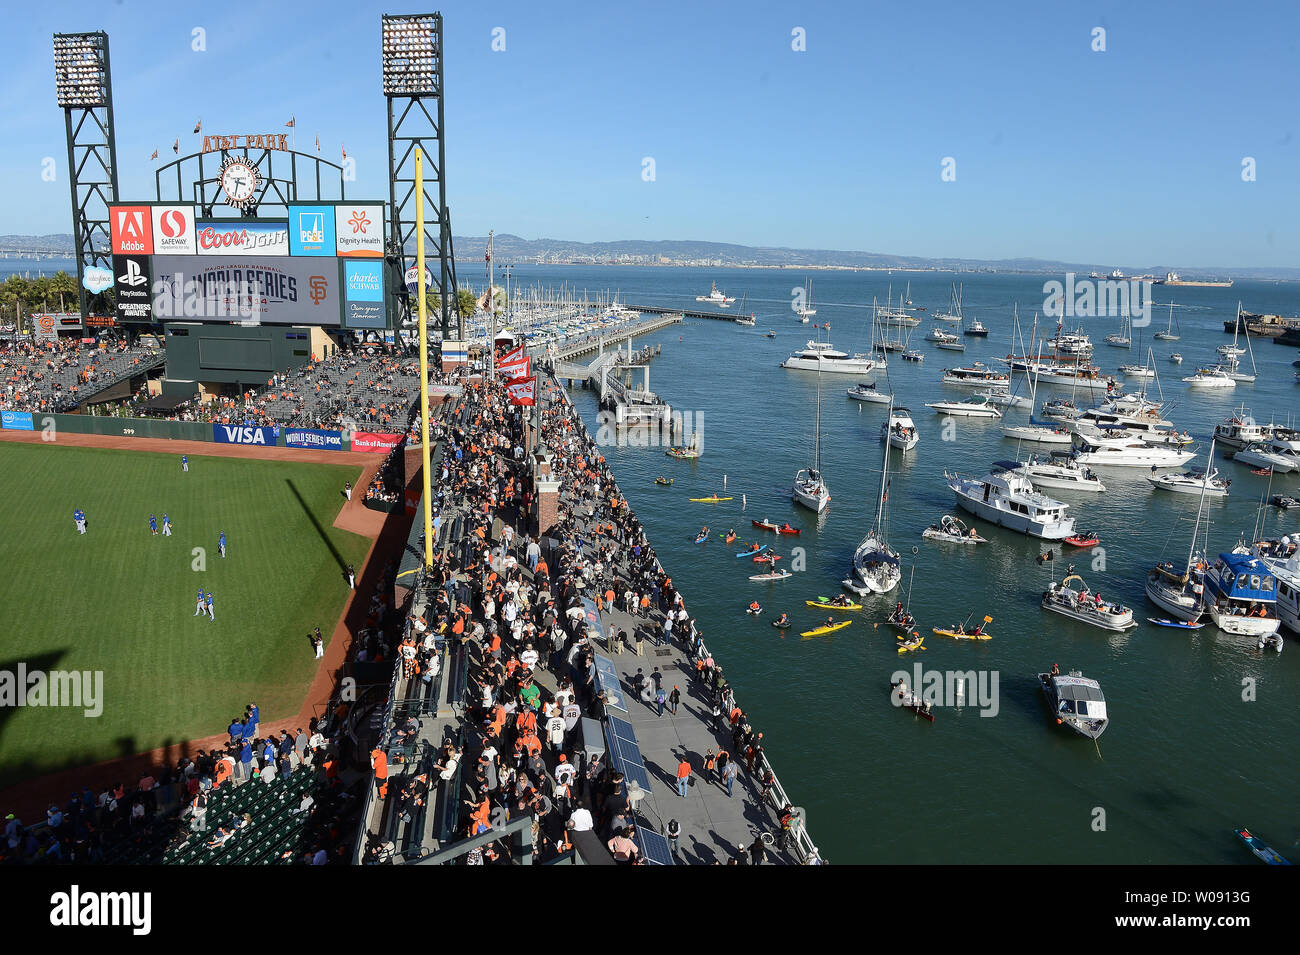 Super Bowl predictions from San Francisco Giants fans - McCovey